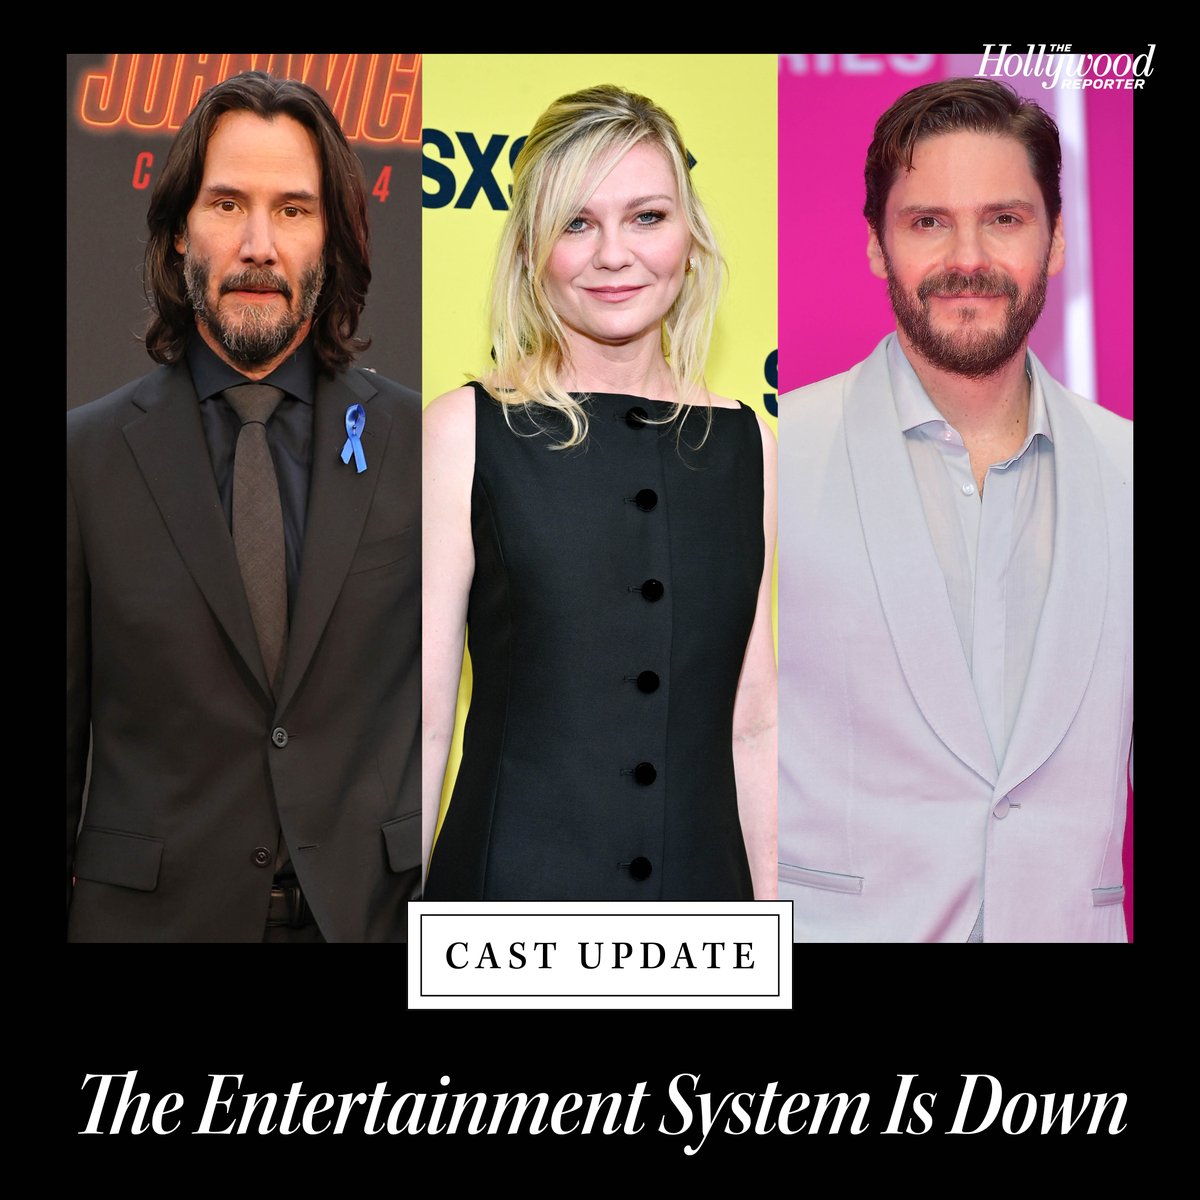 Kirsten Dunst and Daniel Brühl are the latest to join Ruben Östlund's 'The Entertainment System Is Down,' starring Keanu Reeves. More details on the feature here: thr.cm/ZHmZlyk